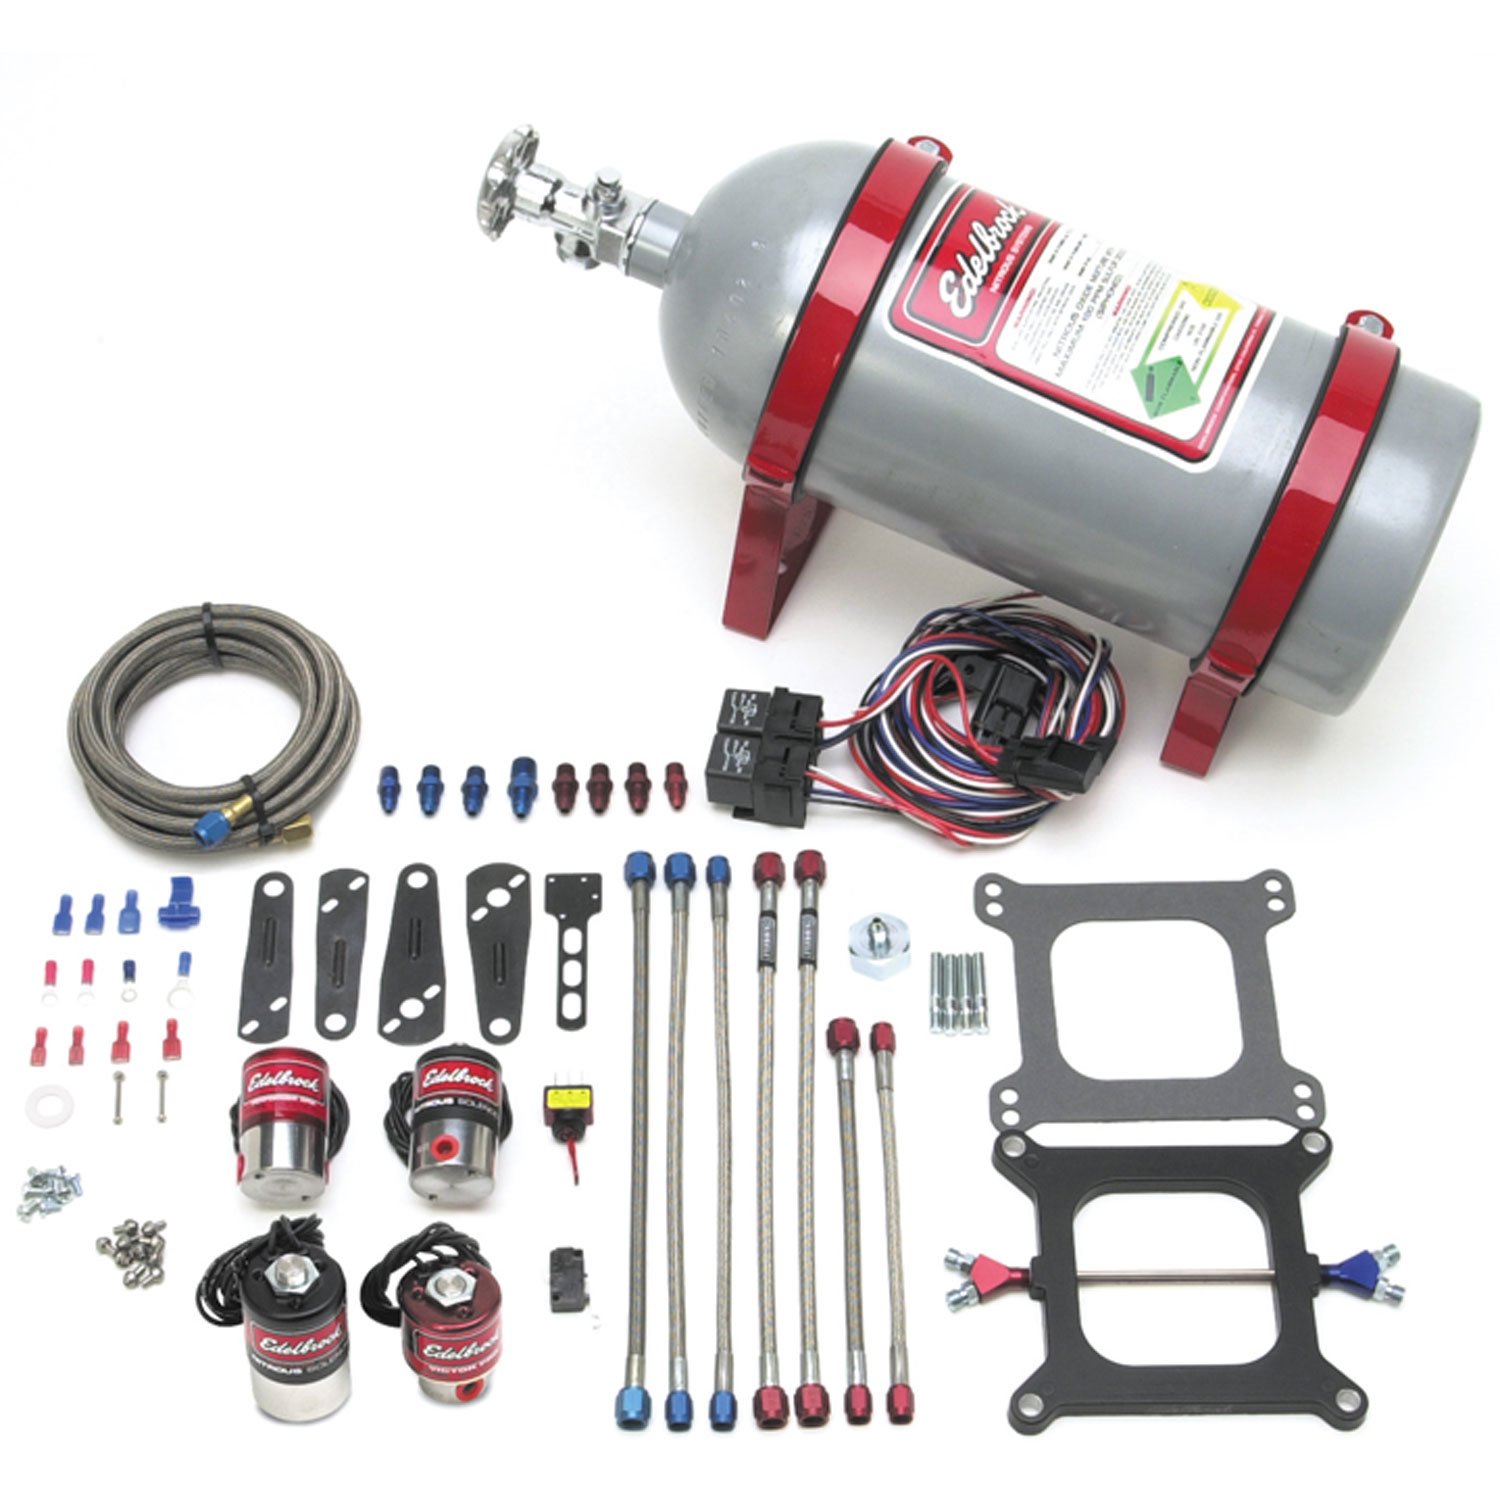 Performer RPM II Dual Stage Nitrous Kit for 4150 Square-bore Carburetor with Silver Powder Coated Bottle